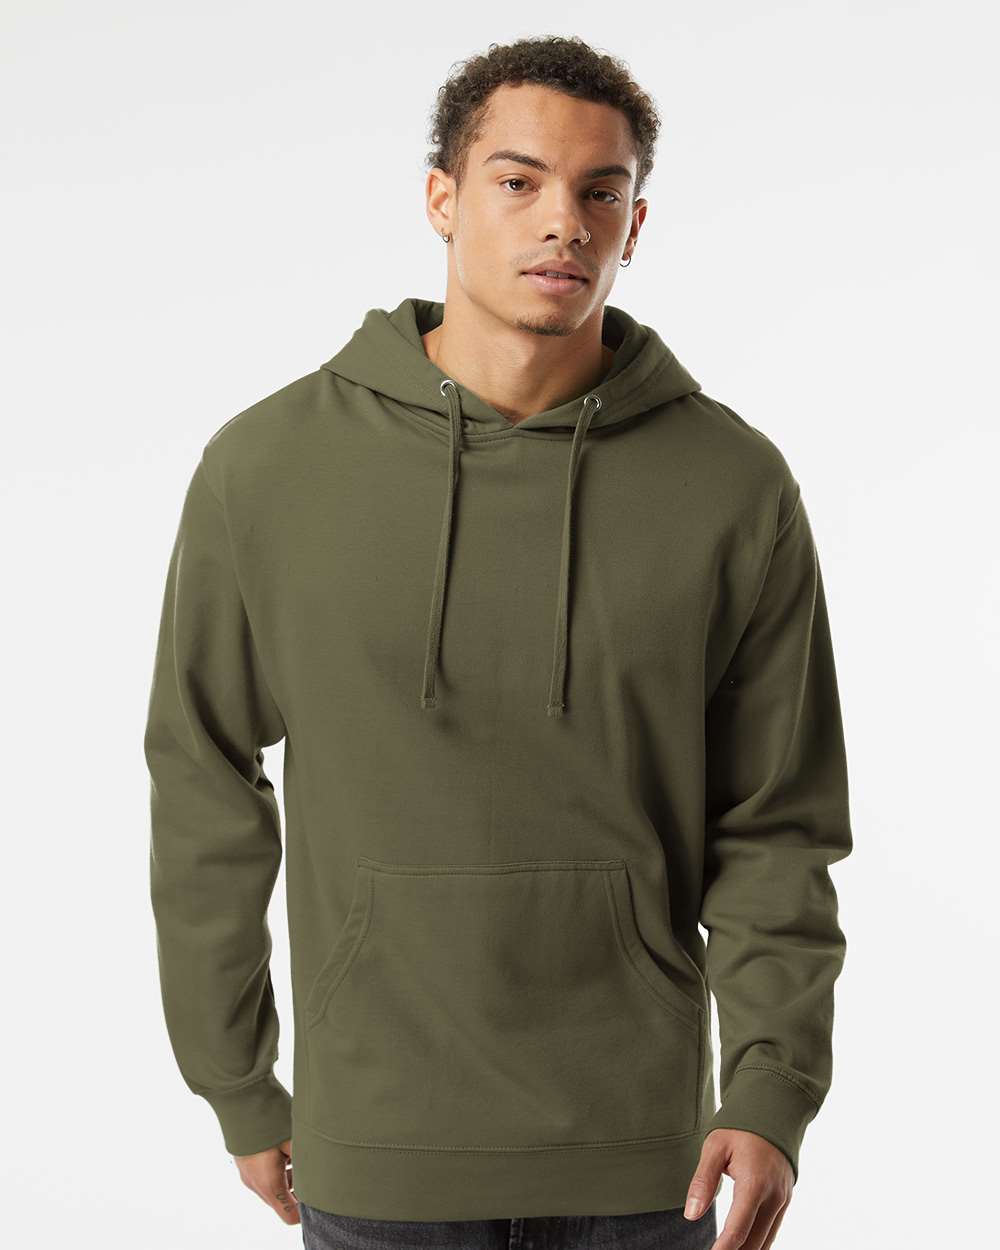 Independent Trading Co. Midweight Hooded Sweatshirt SS4500 #colormdl_Army